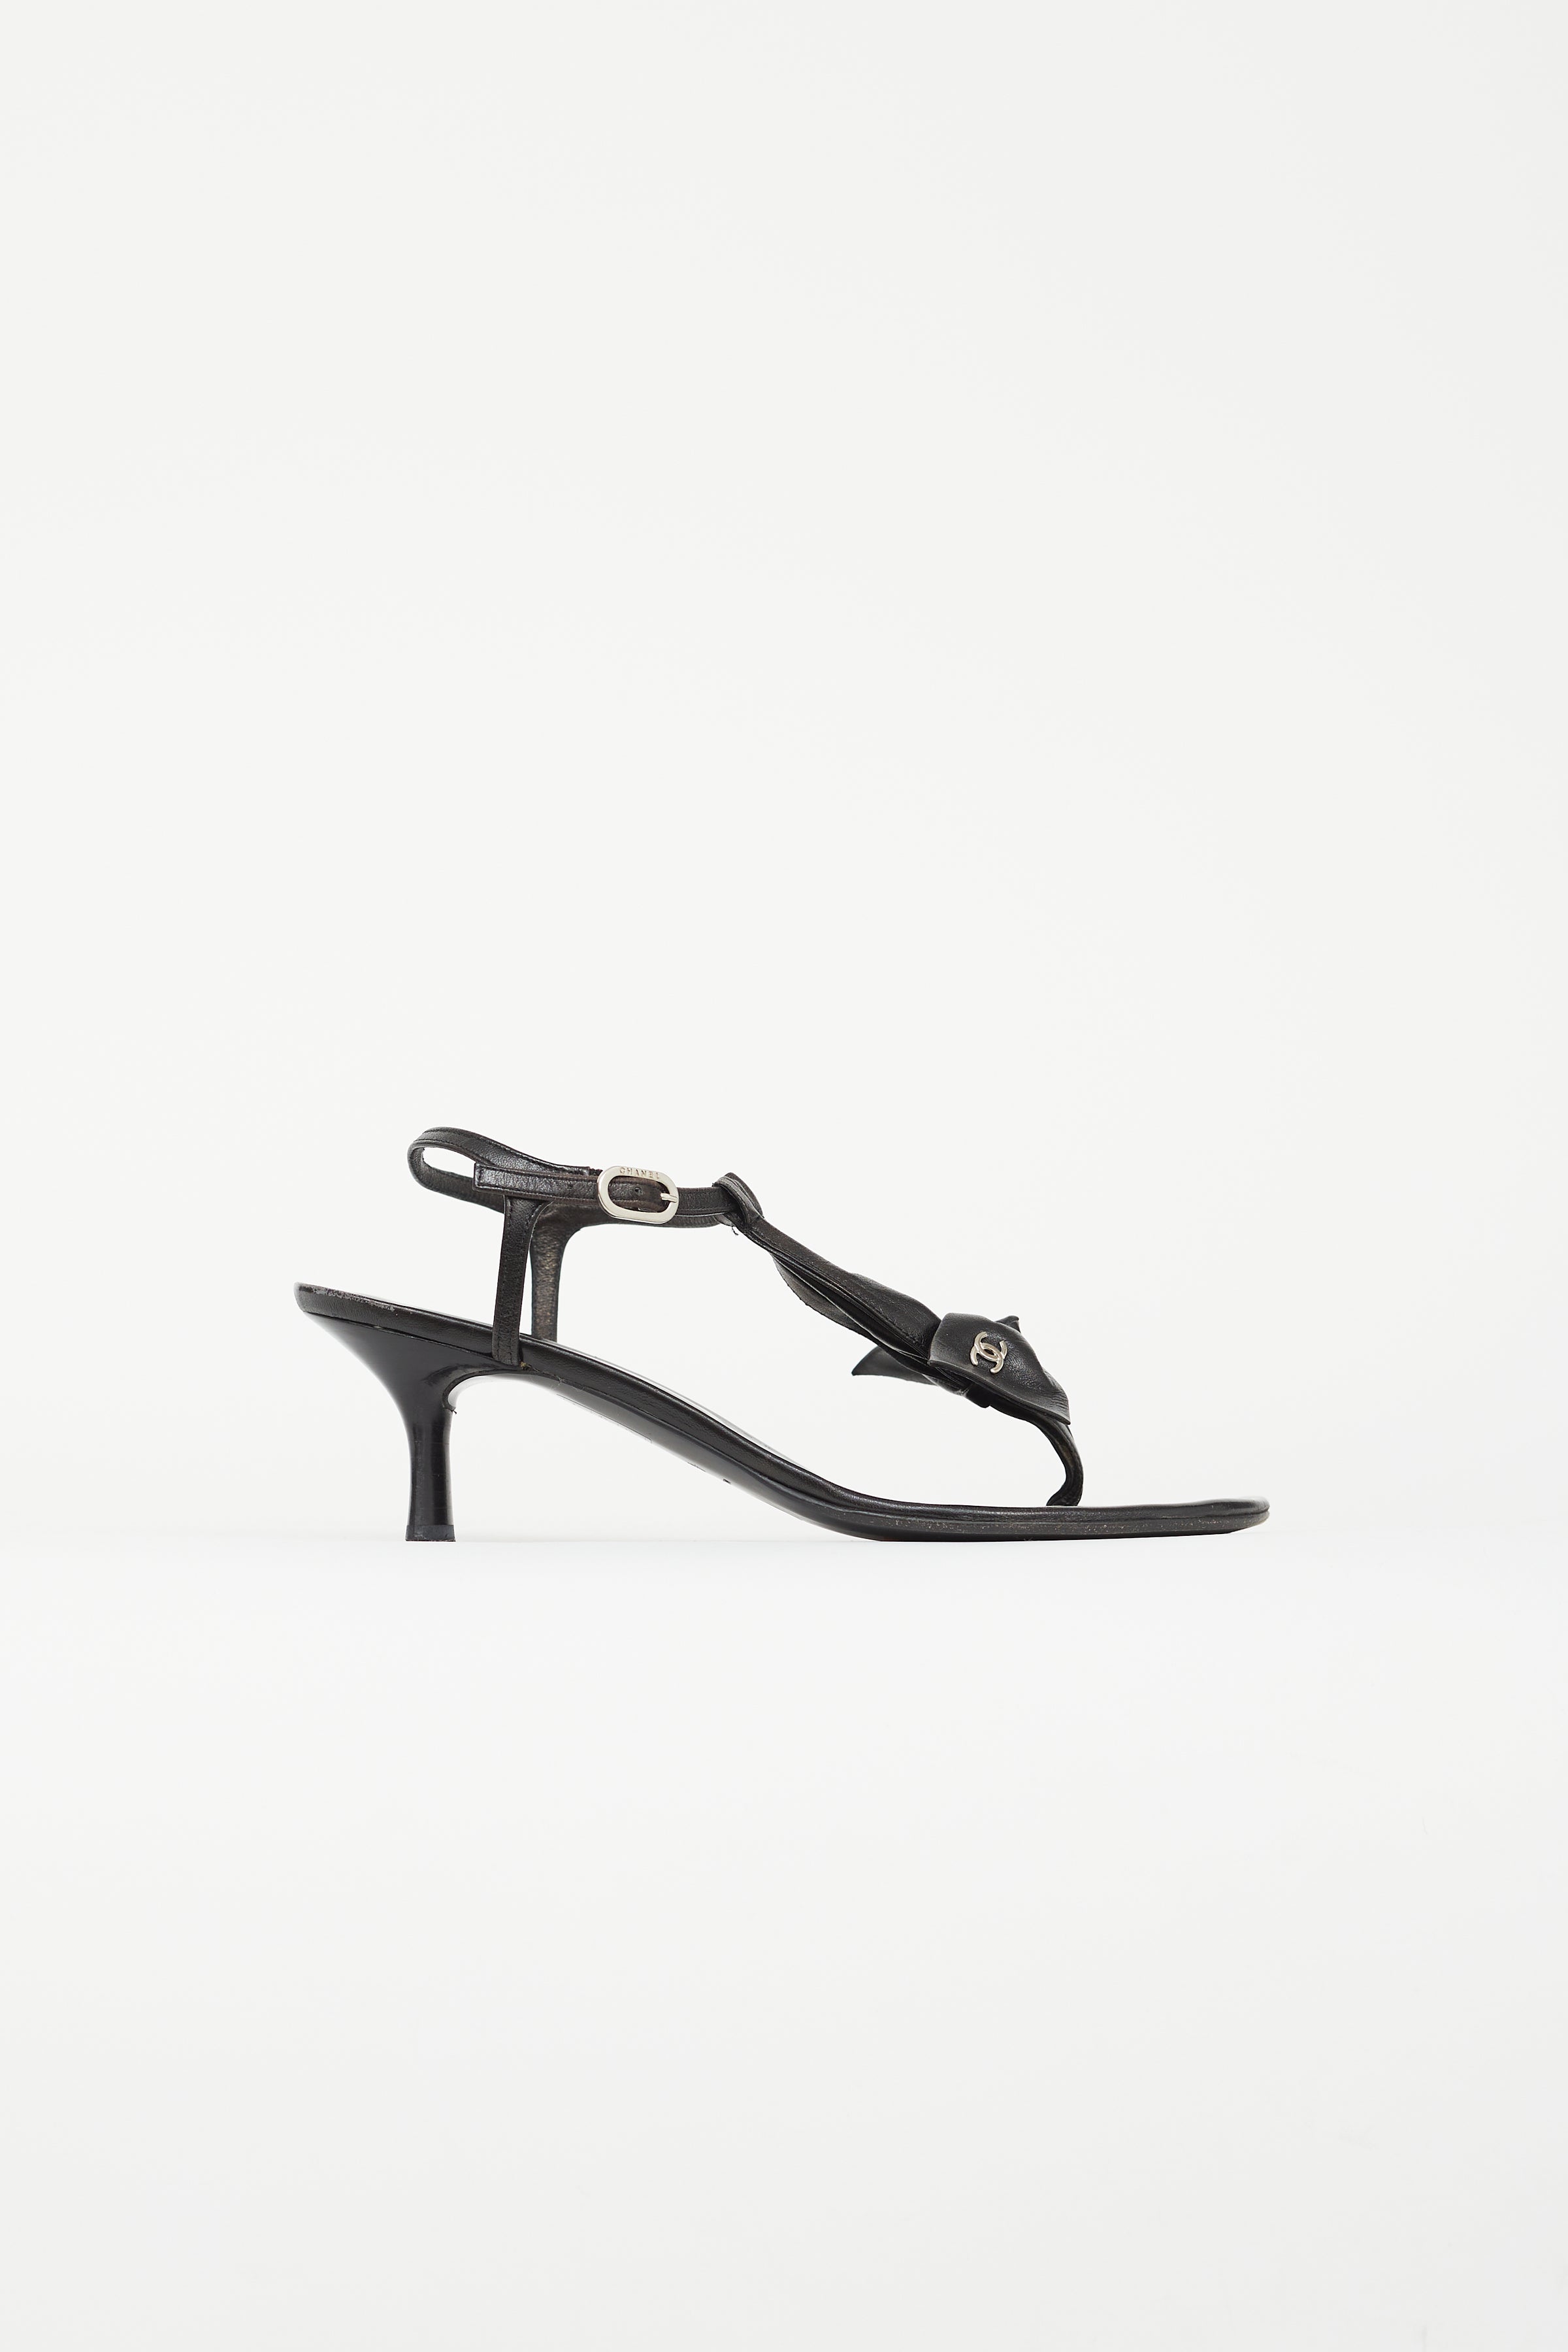 Chanel // Black Leather Bow Heeled Sandal – VSP Consignment